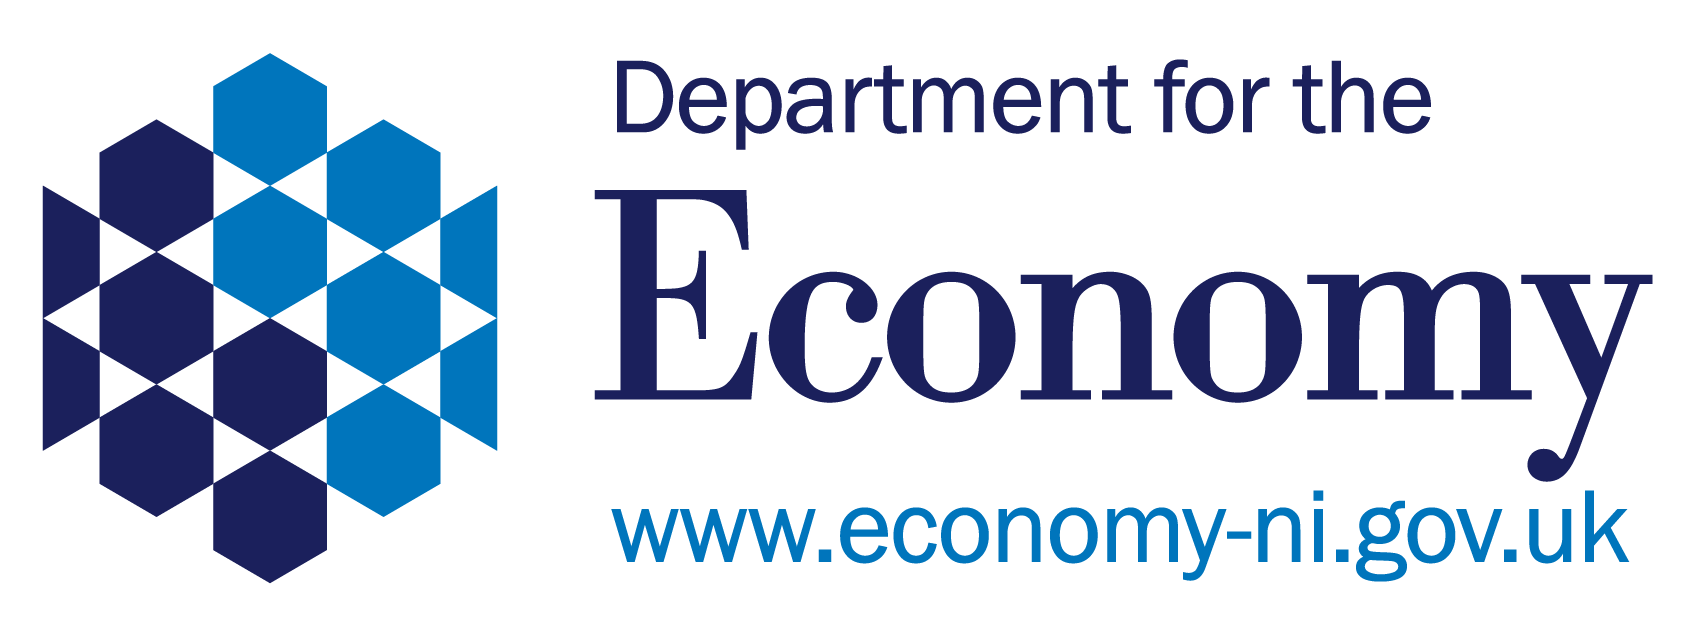 Department for the Economy Logo